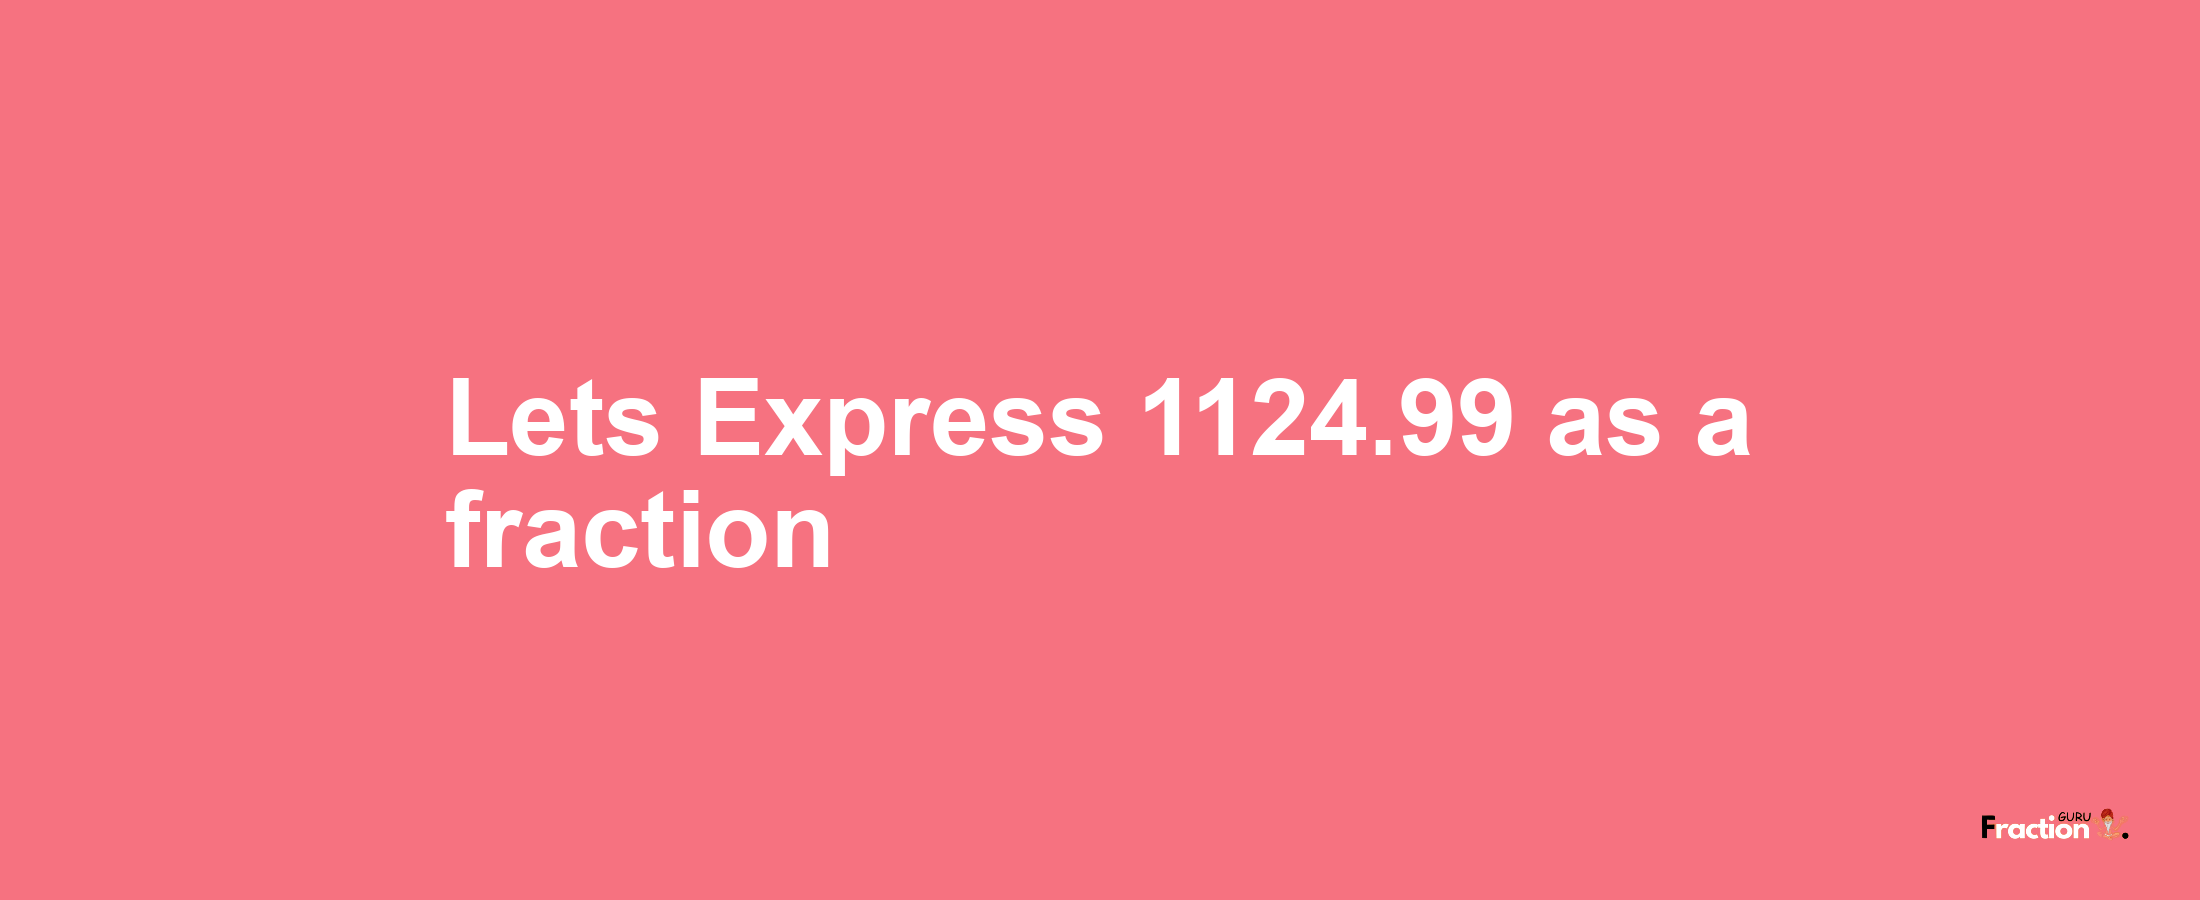 Lets Express 1124.99 as afraction